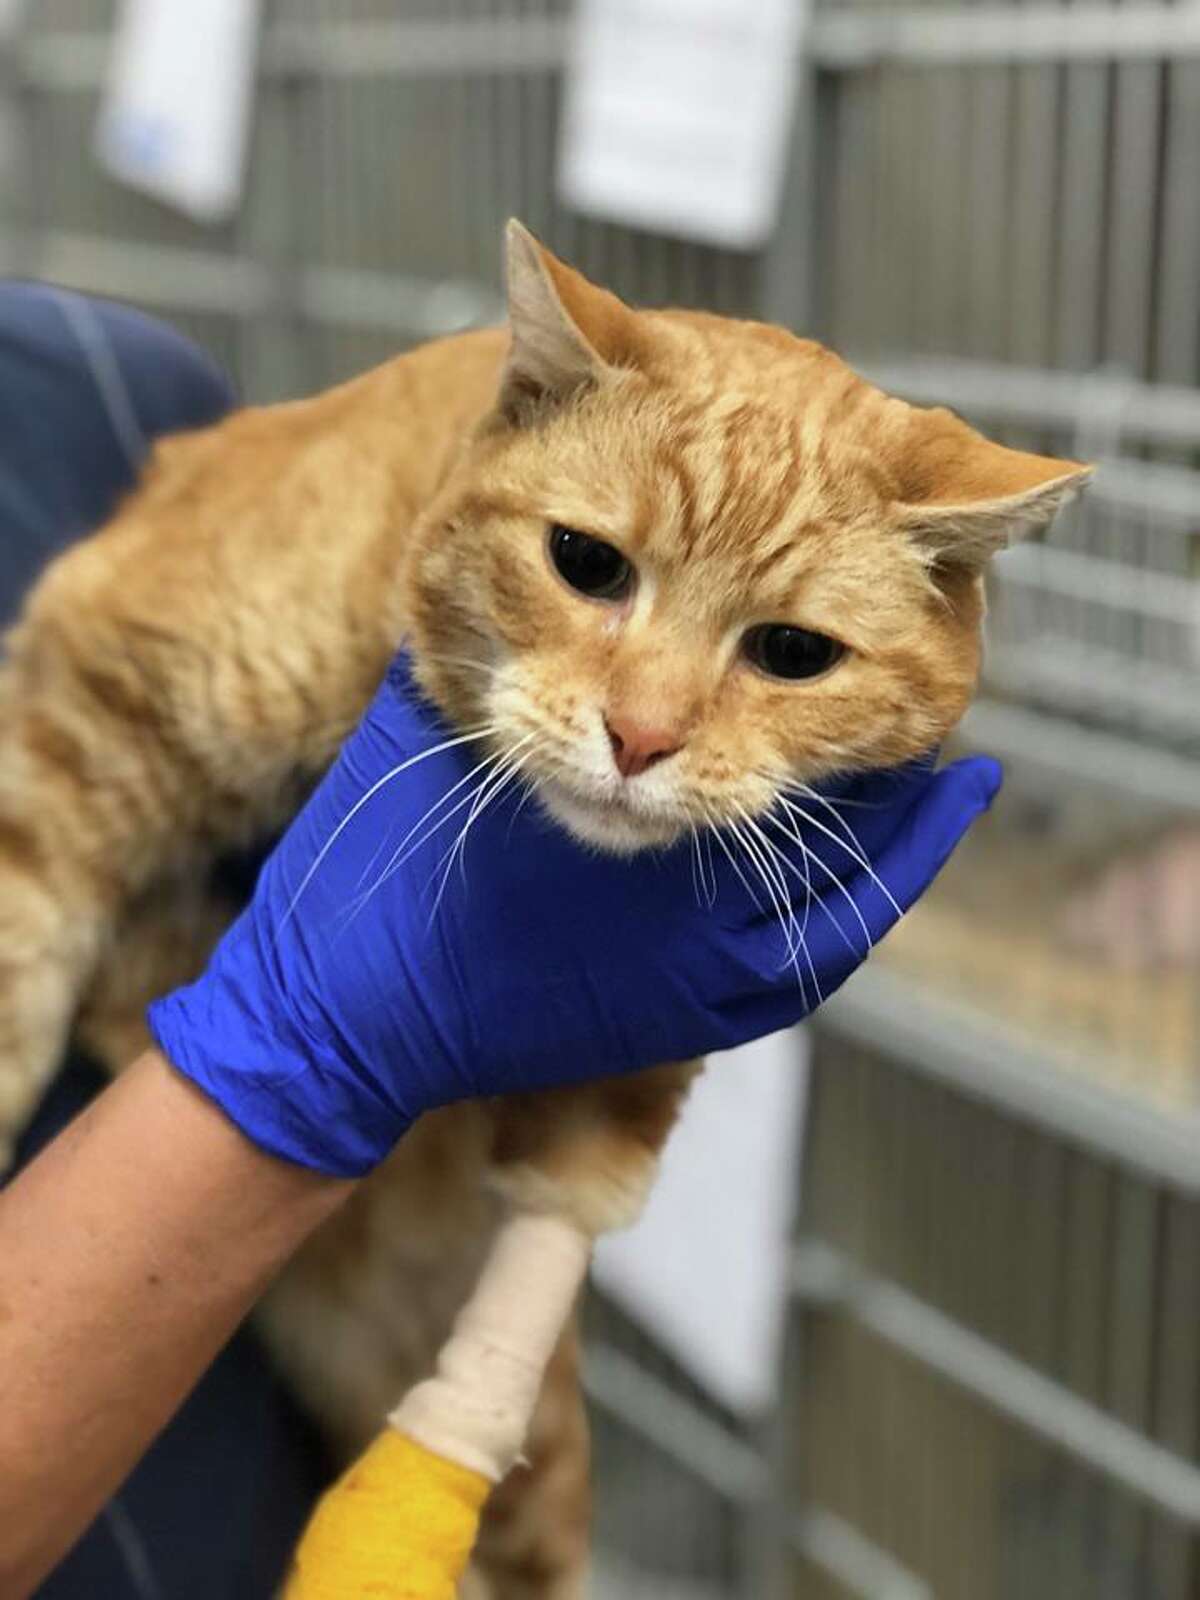 Male, neutered. SF SPCA ID: A40173430 SF SPCA given name (NOT the animal's real name): "Blake" If you believe this cat is yours, call SF SPCA at 415-554-3030.